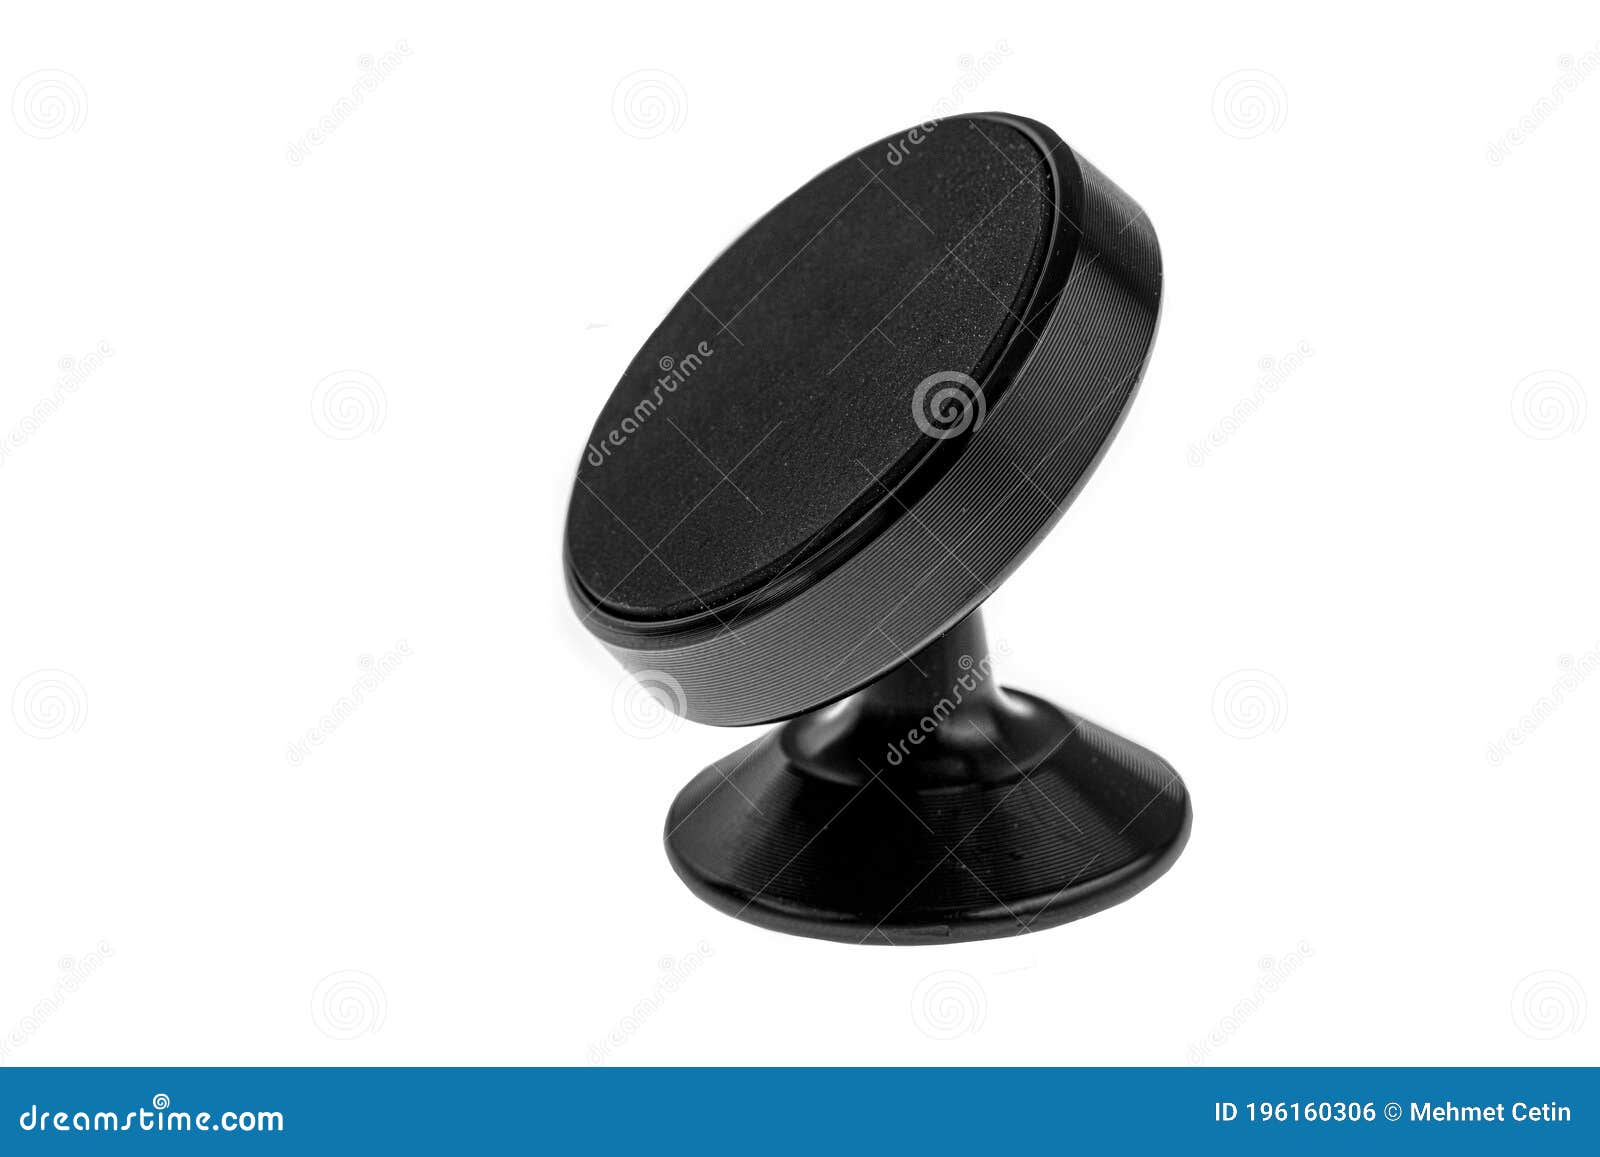 A Black Plastic Mobile Phone Holder with a Magnetic Fixture with